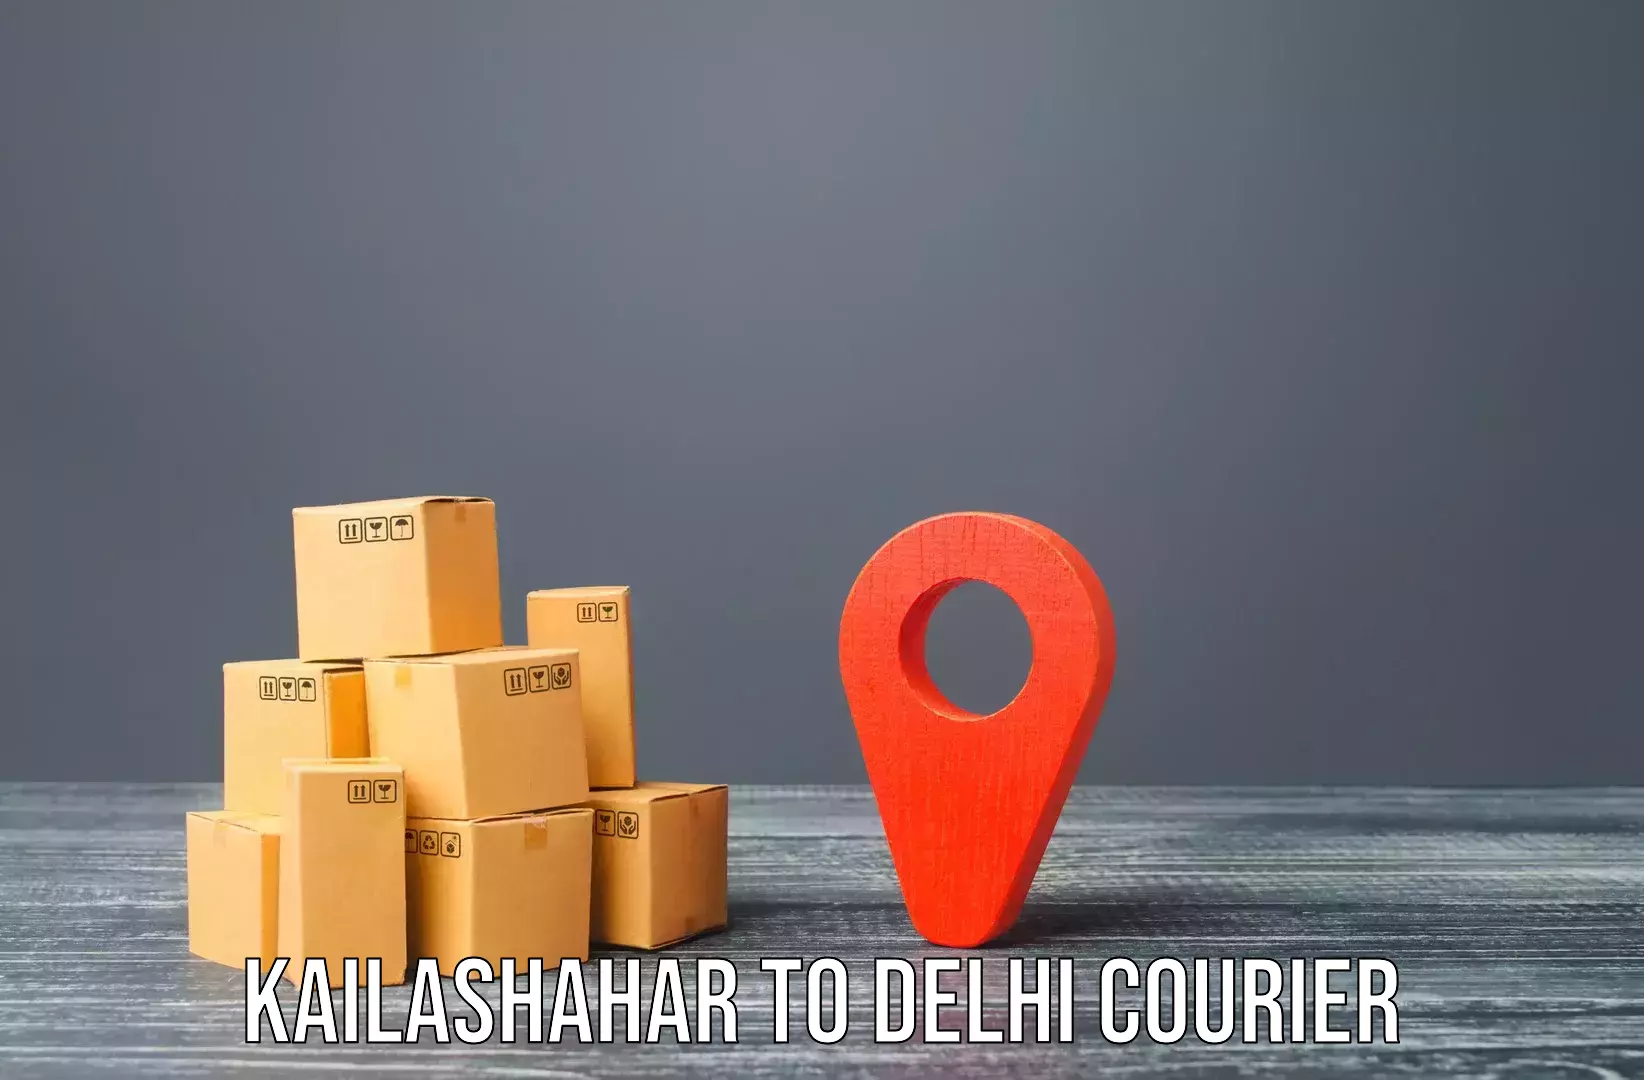 Professional furniture movers Kailashahar to NCR